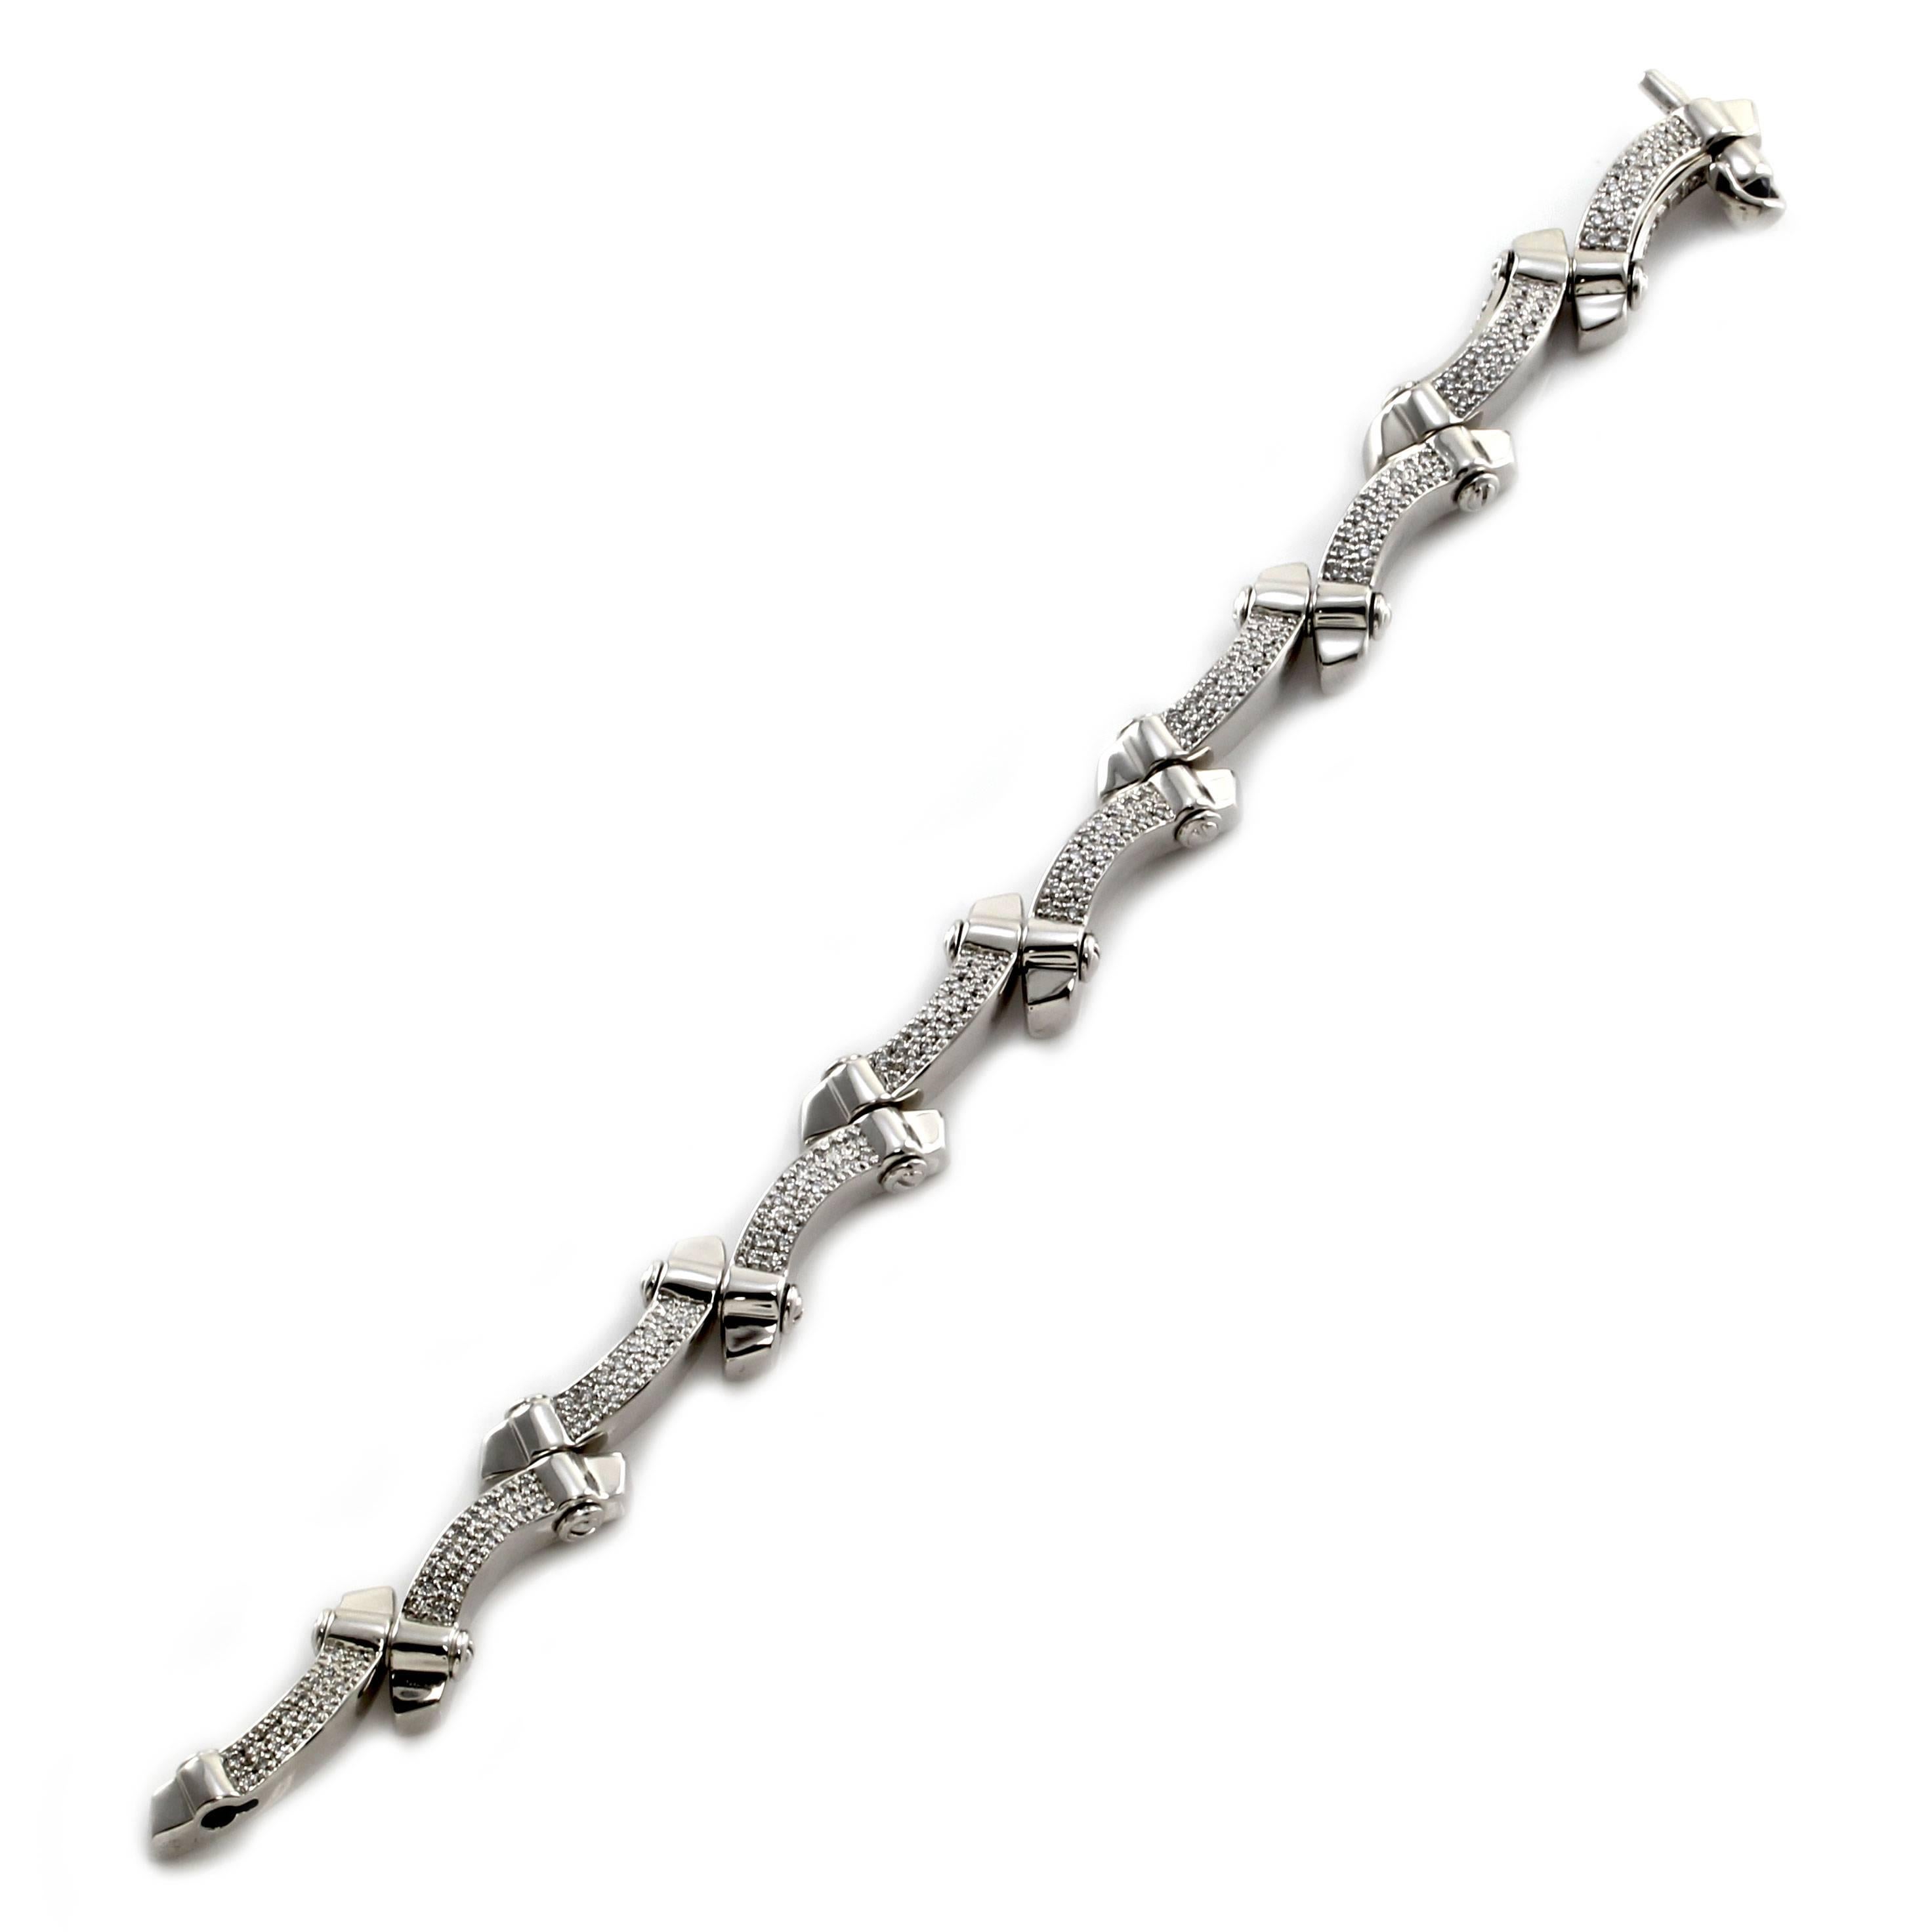 Philippe Charriol Pave Diamond White Gold Bracelet In Excellent Condition For Sale In Scottsdale, AZ